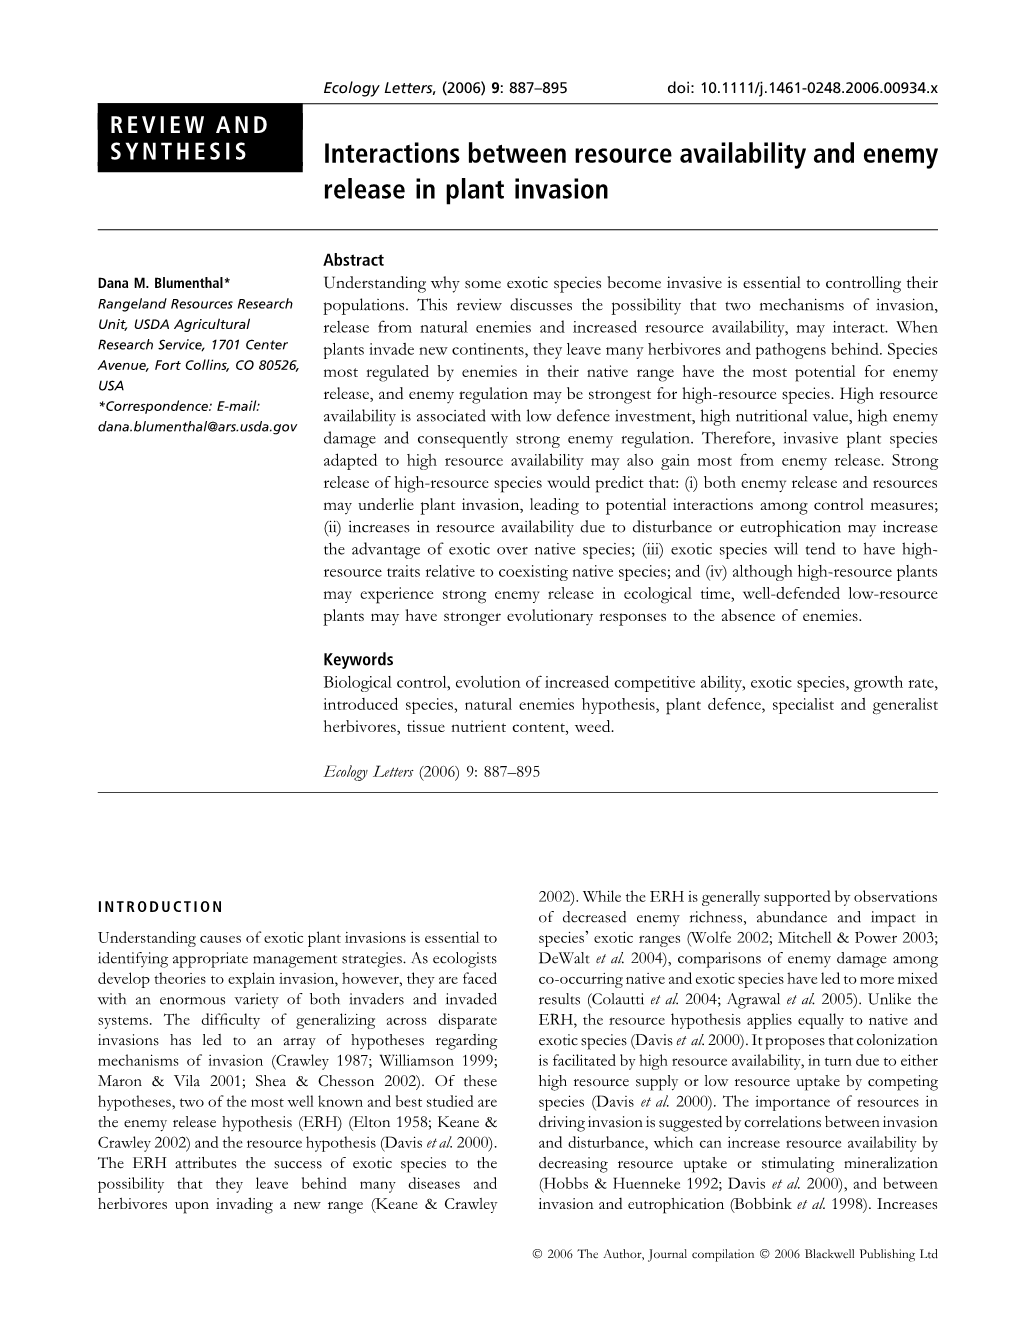 Interactions Between Resource Availability and Enemy Release in Plant Invasion